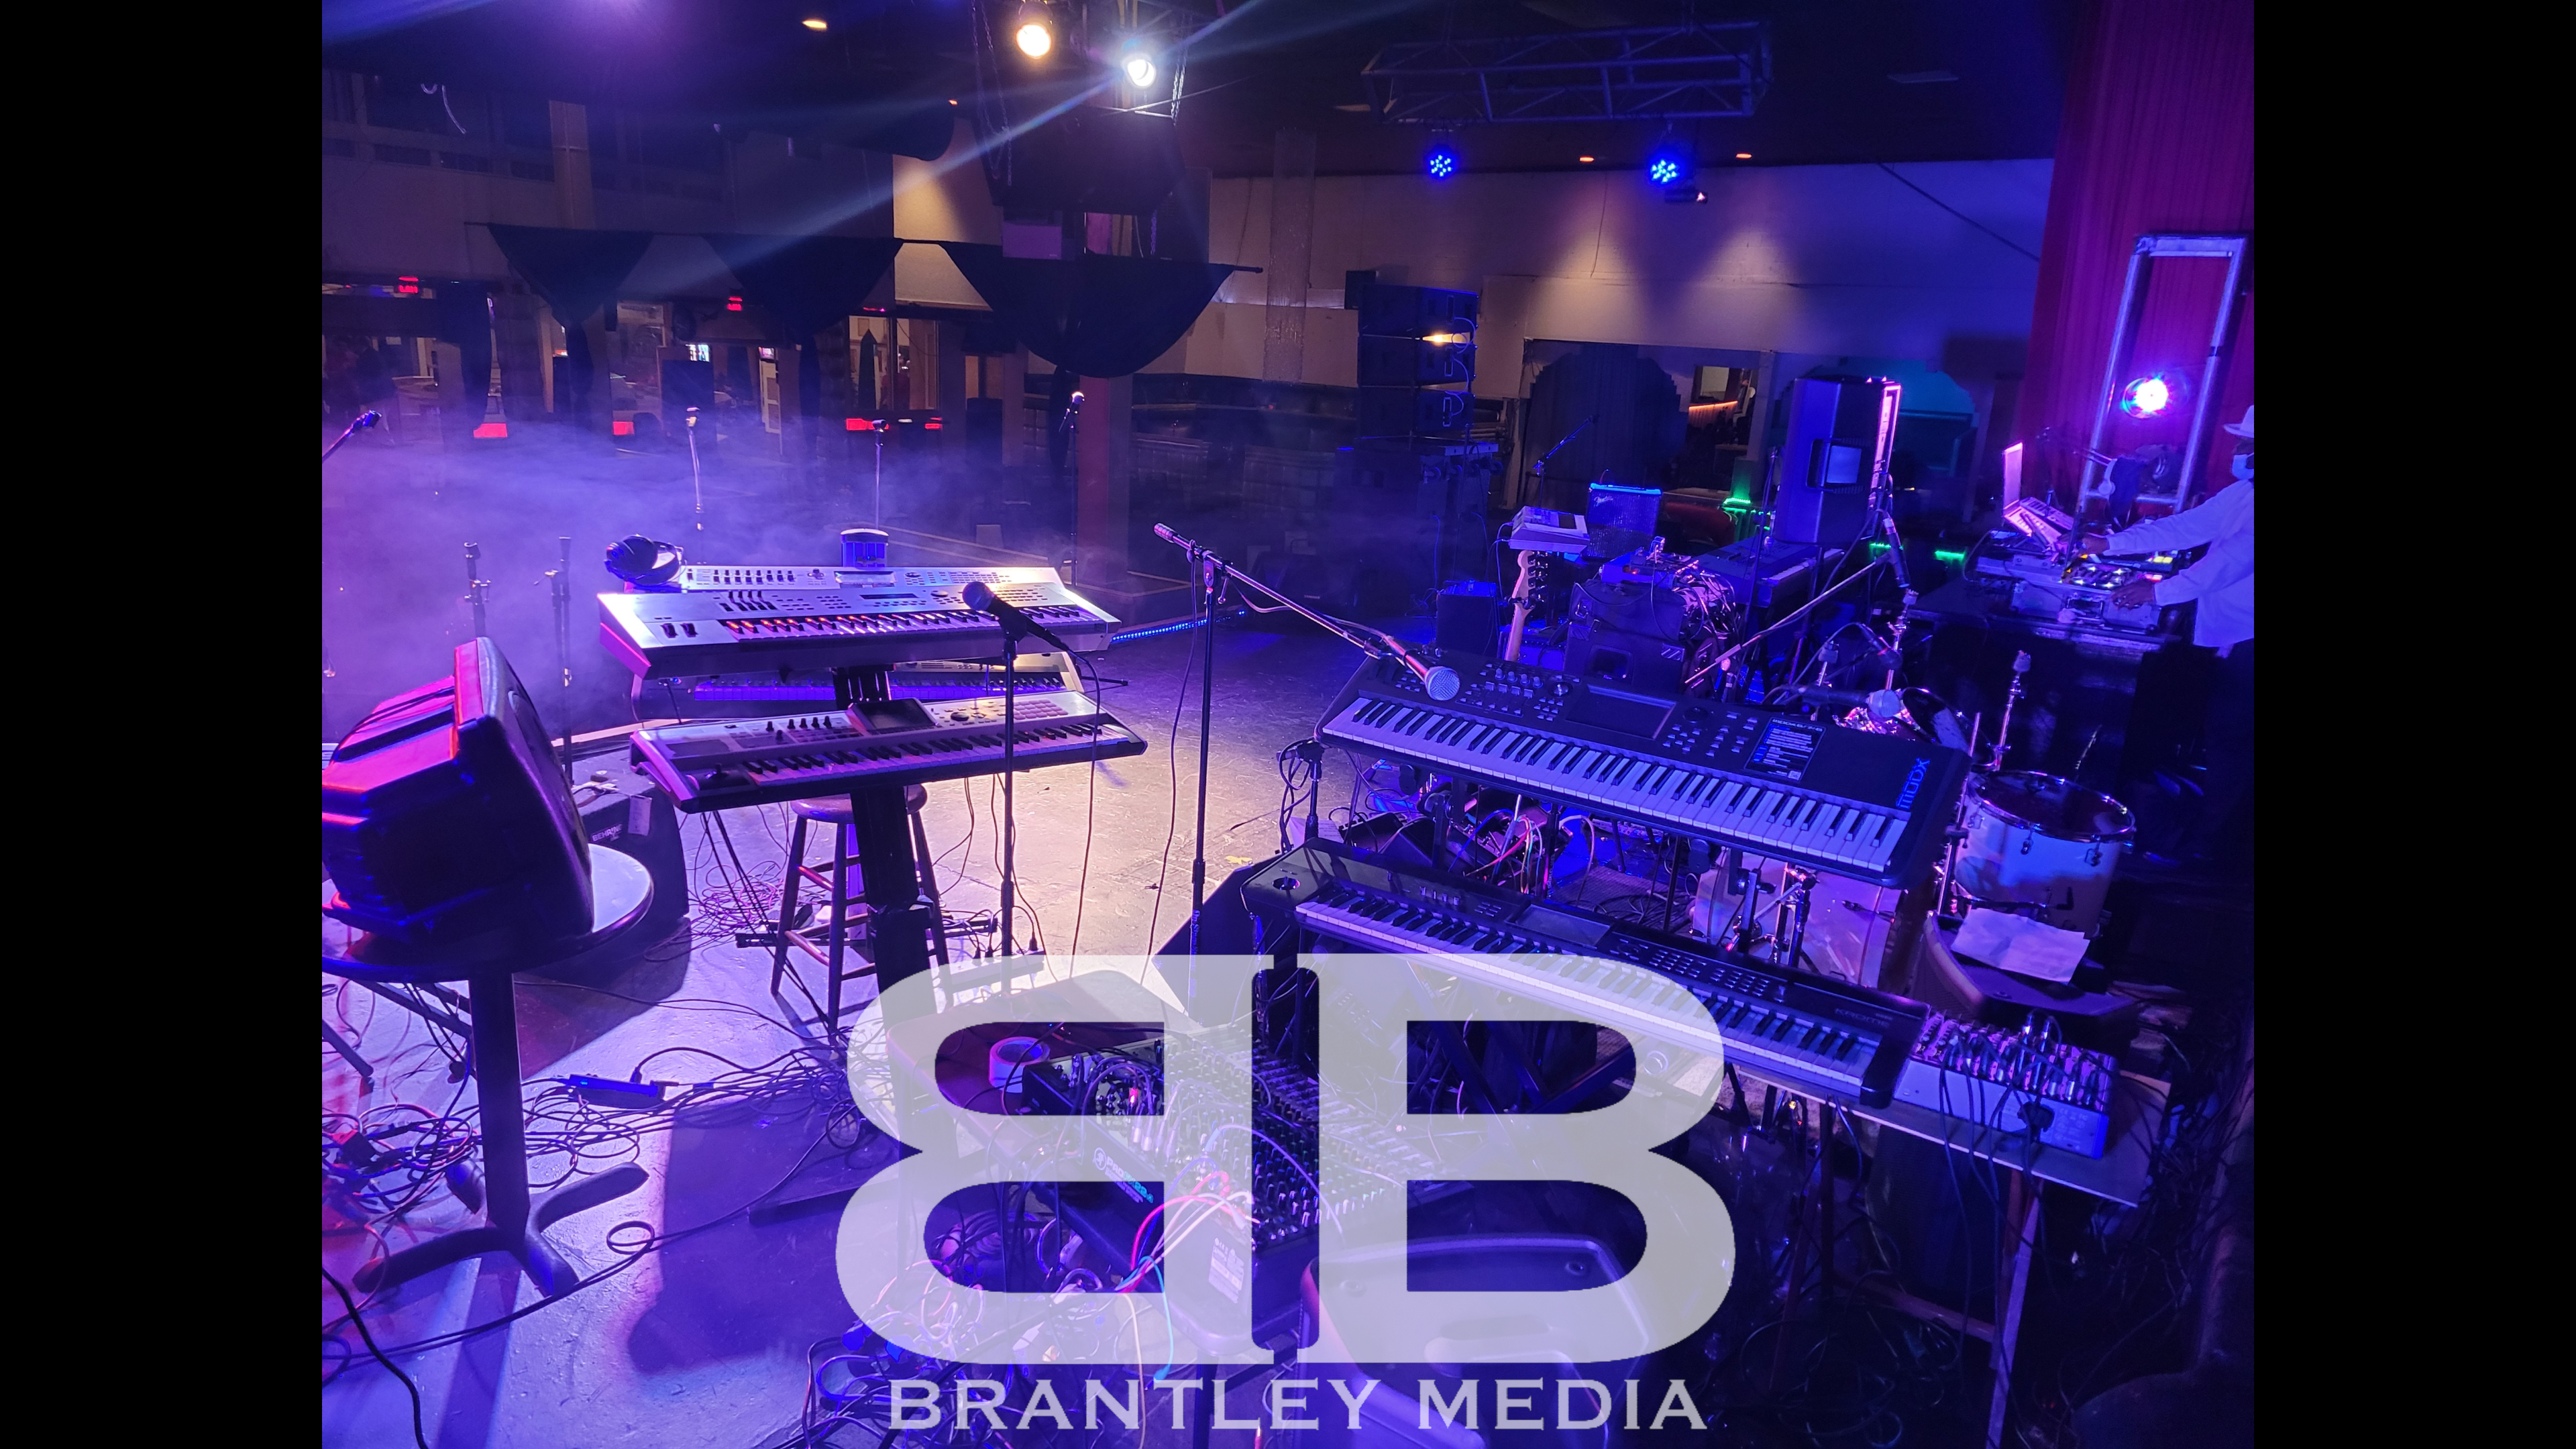 Band equipment on Stage with Brantley Media logo